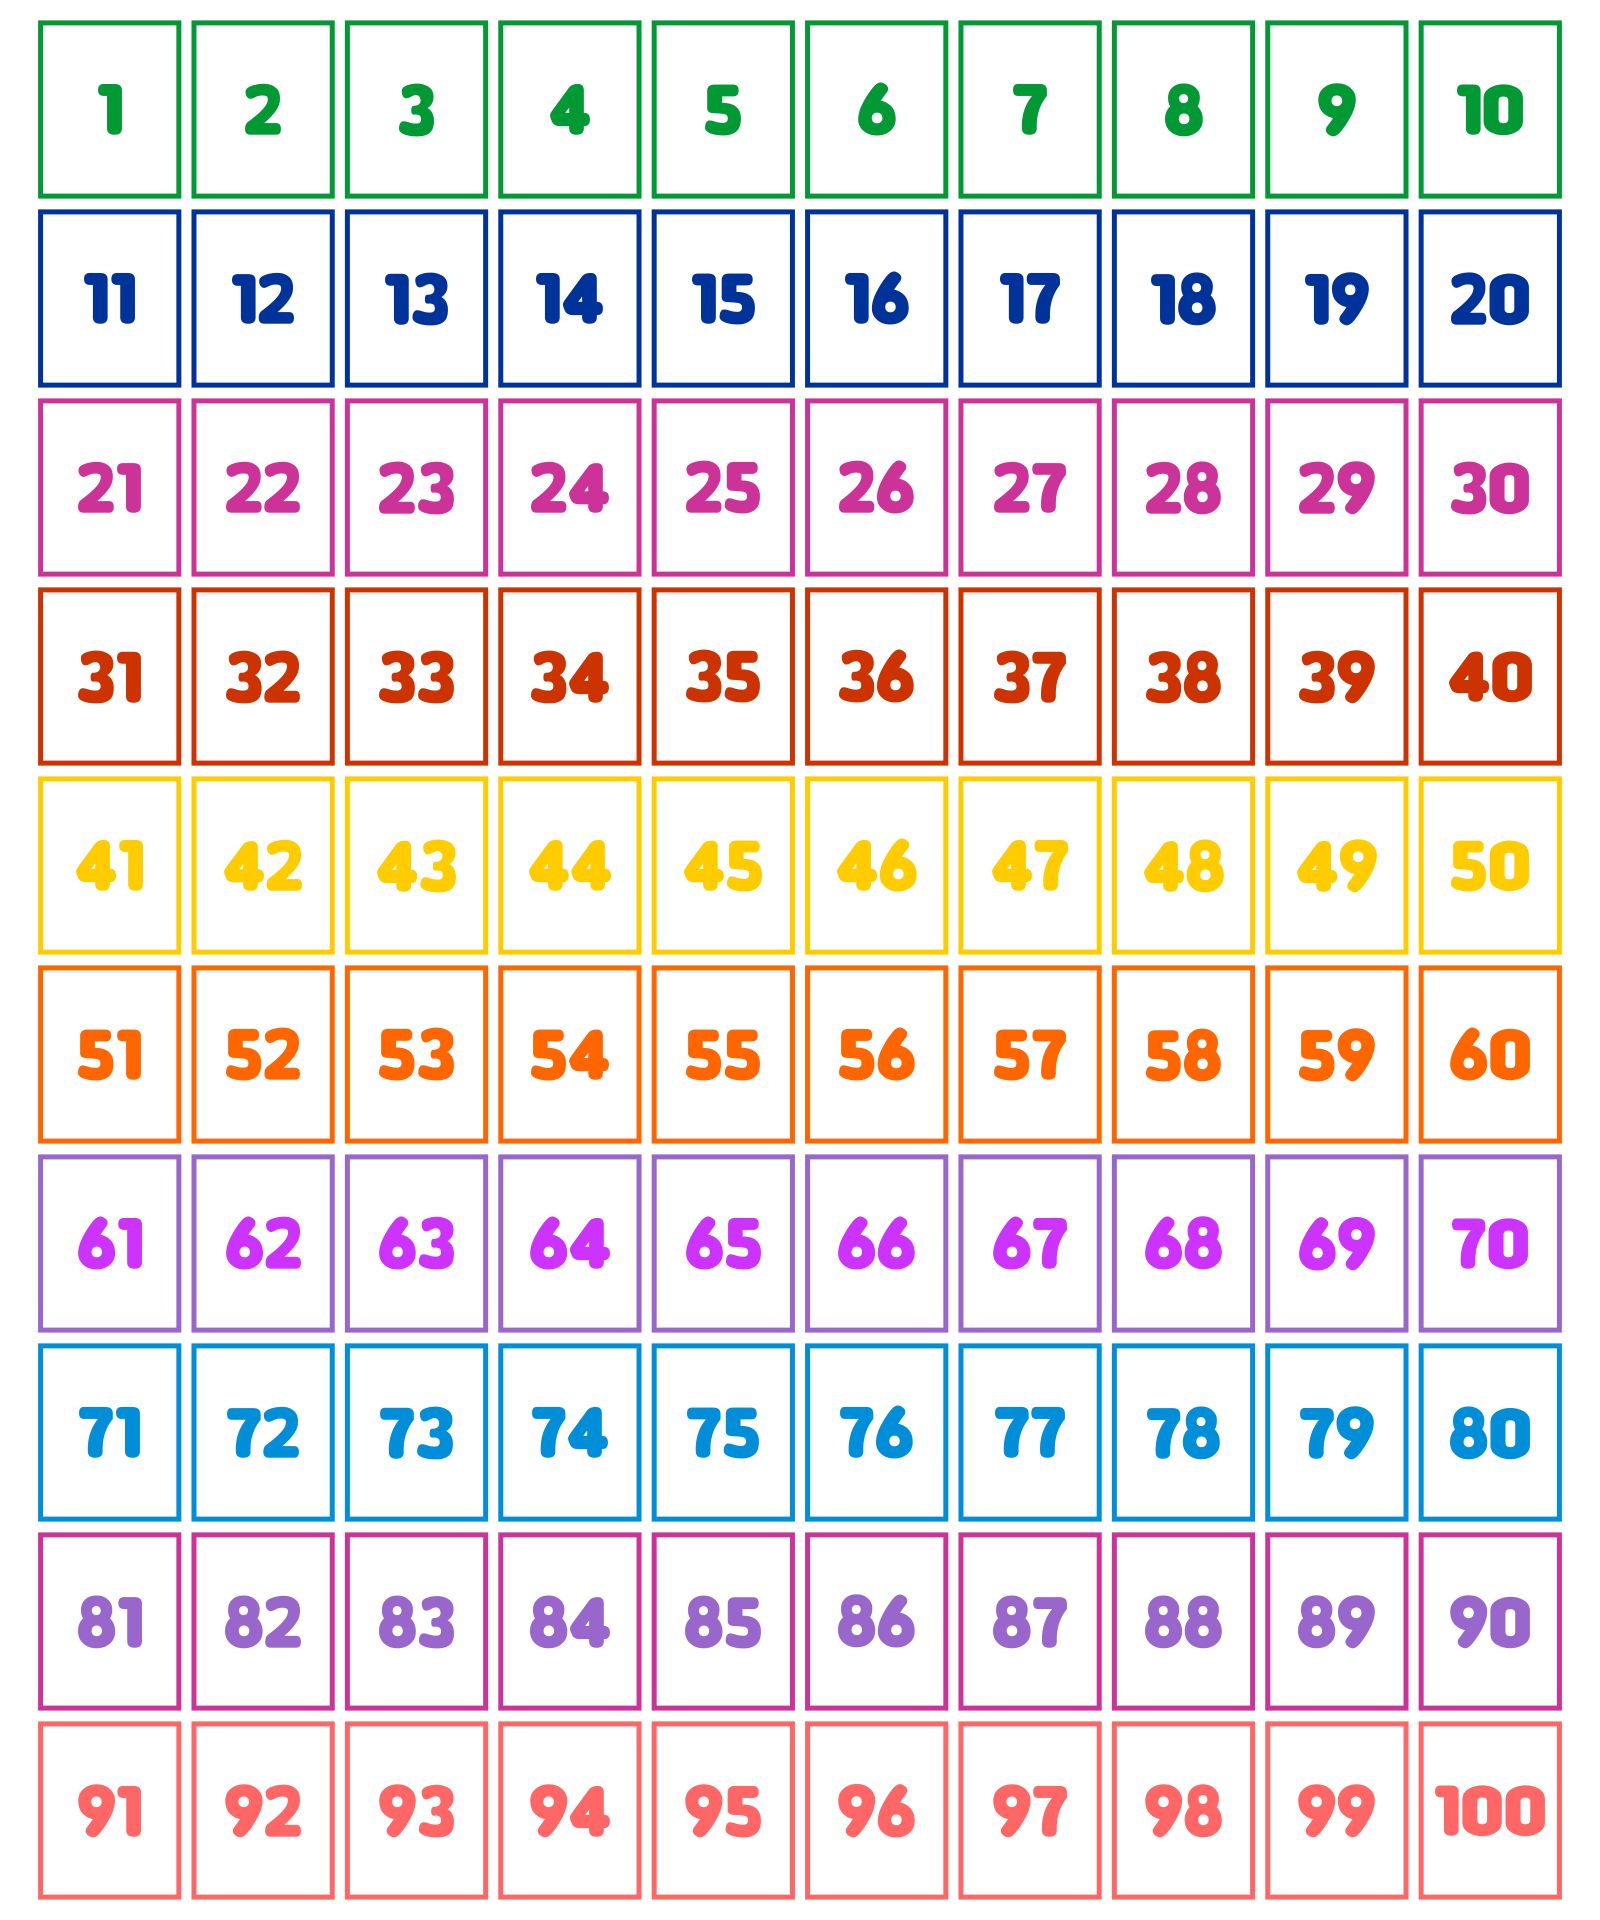 Free Printable Number Flashcards 1 100 With Words Pdf Number Dyslexia 